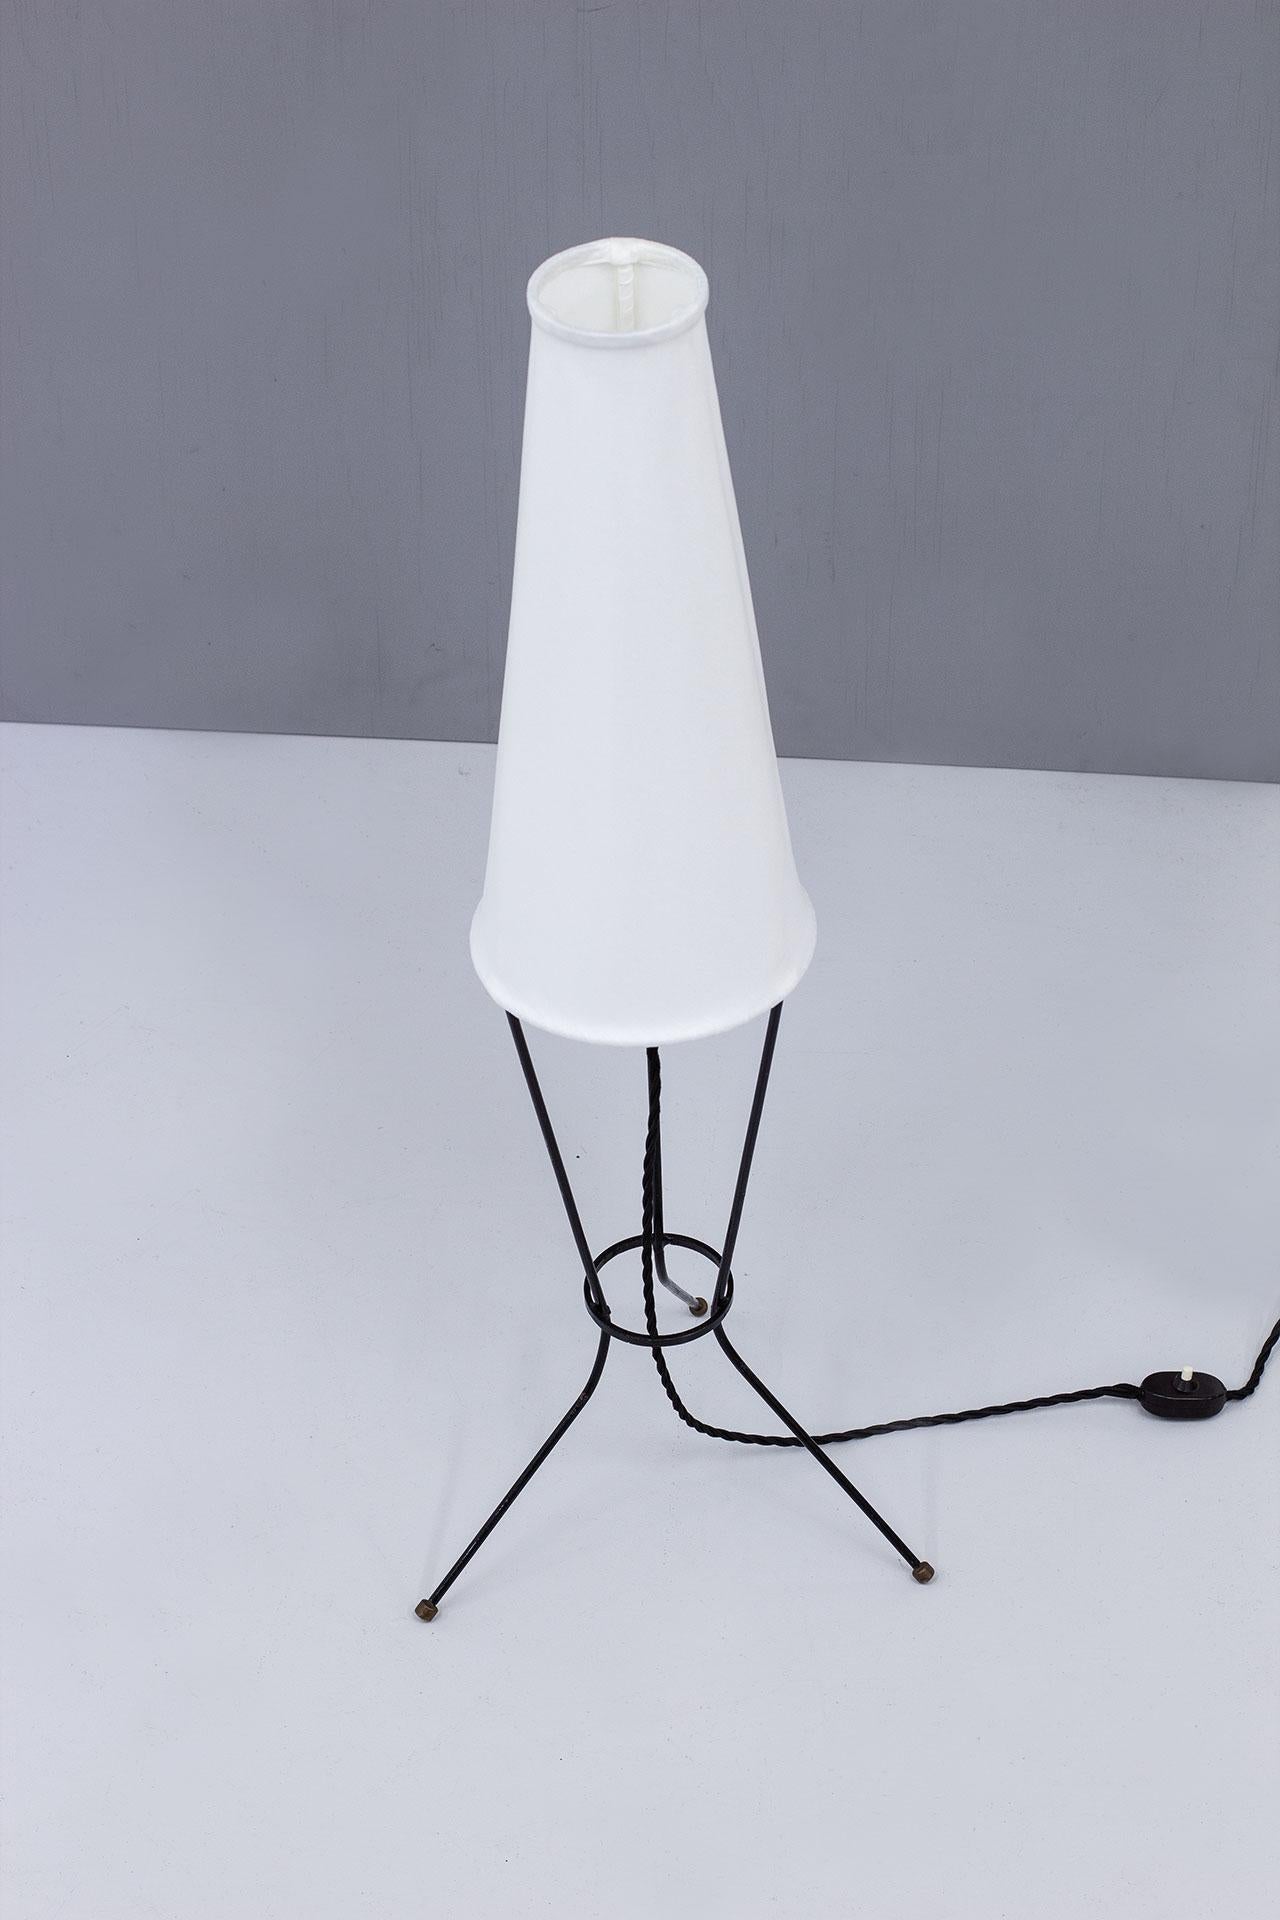 Black Metal & White Fabric Swedish Modern Lamp  In Good Condition For Sale In Stockholm, SE